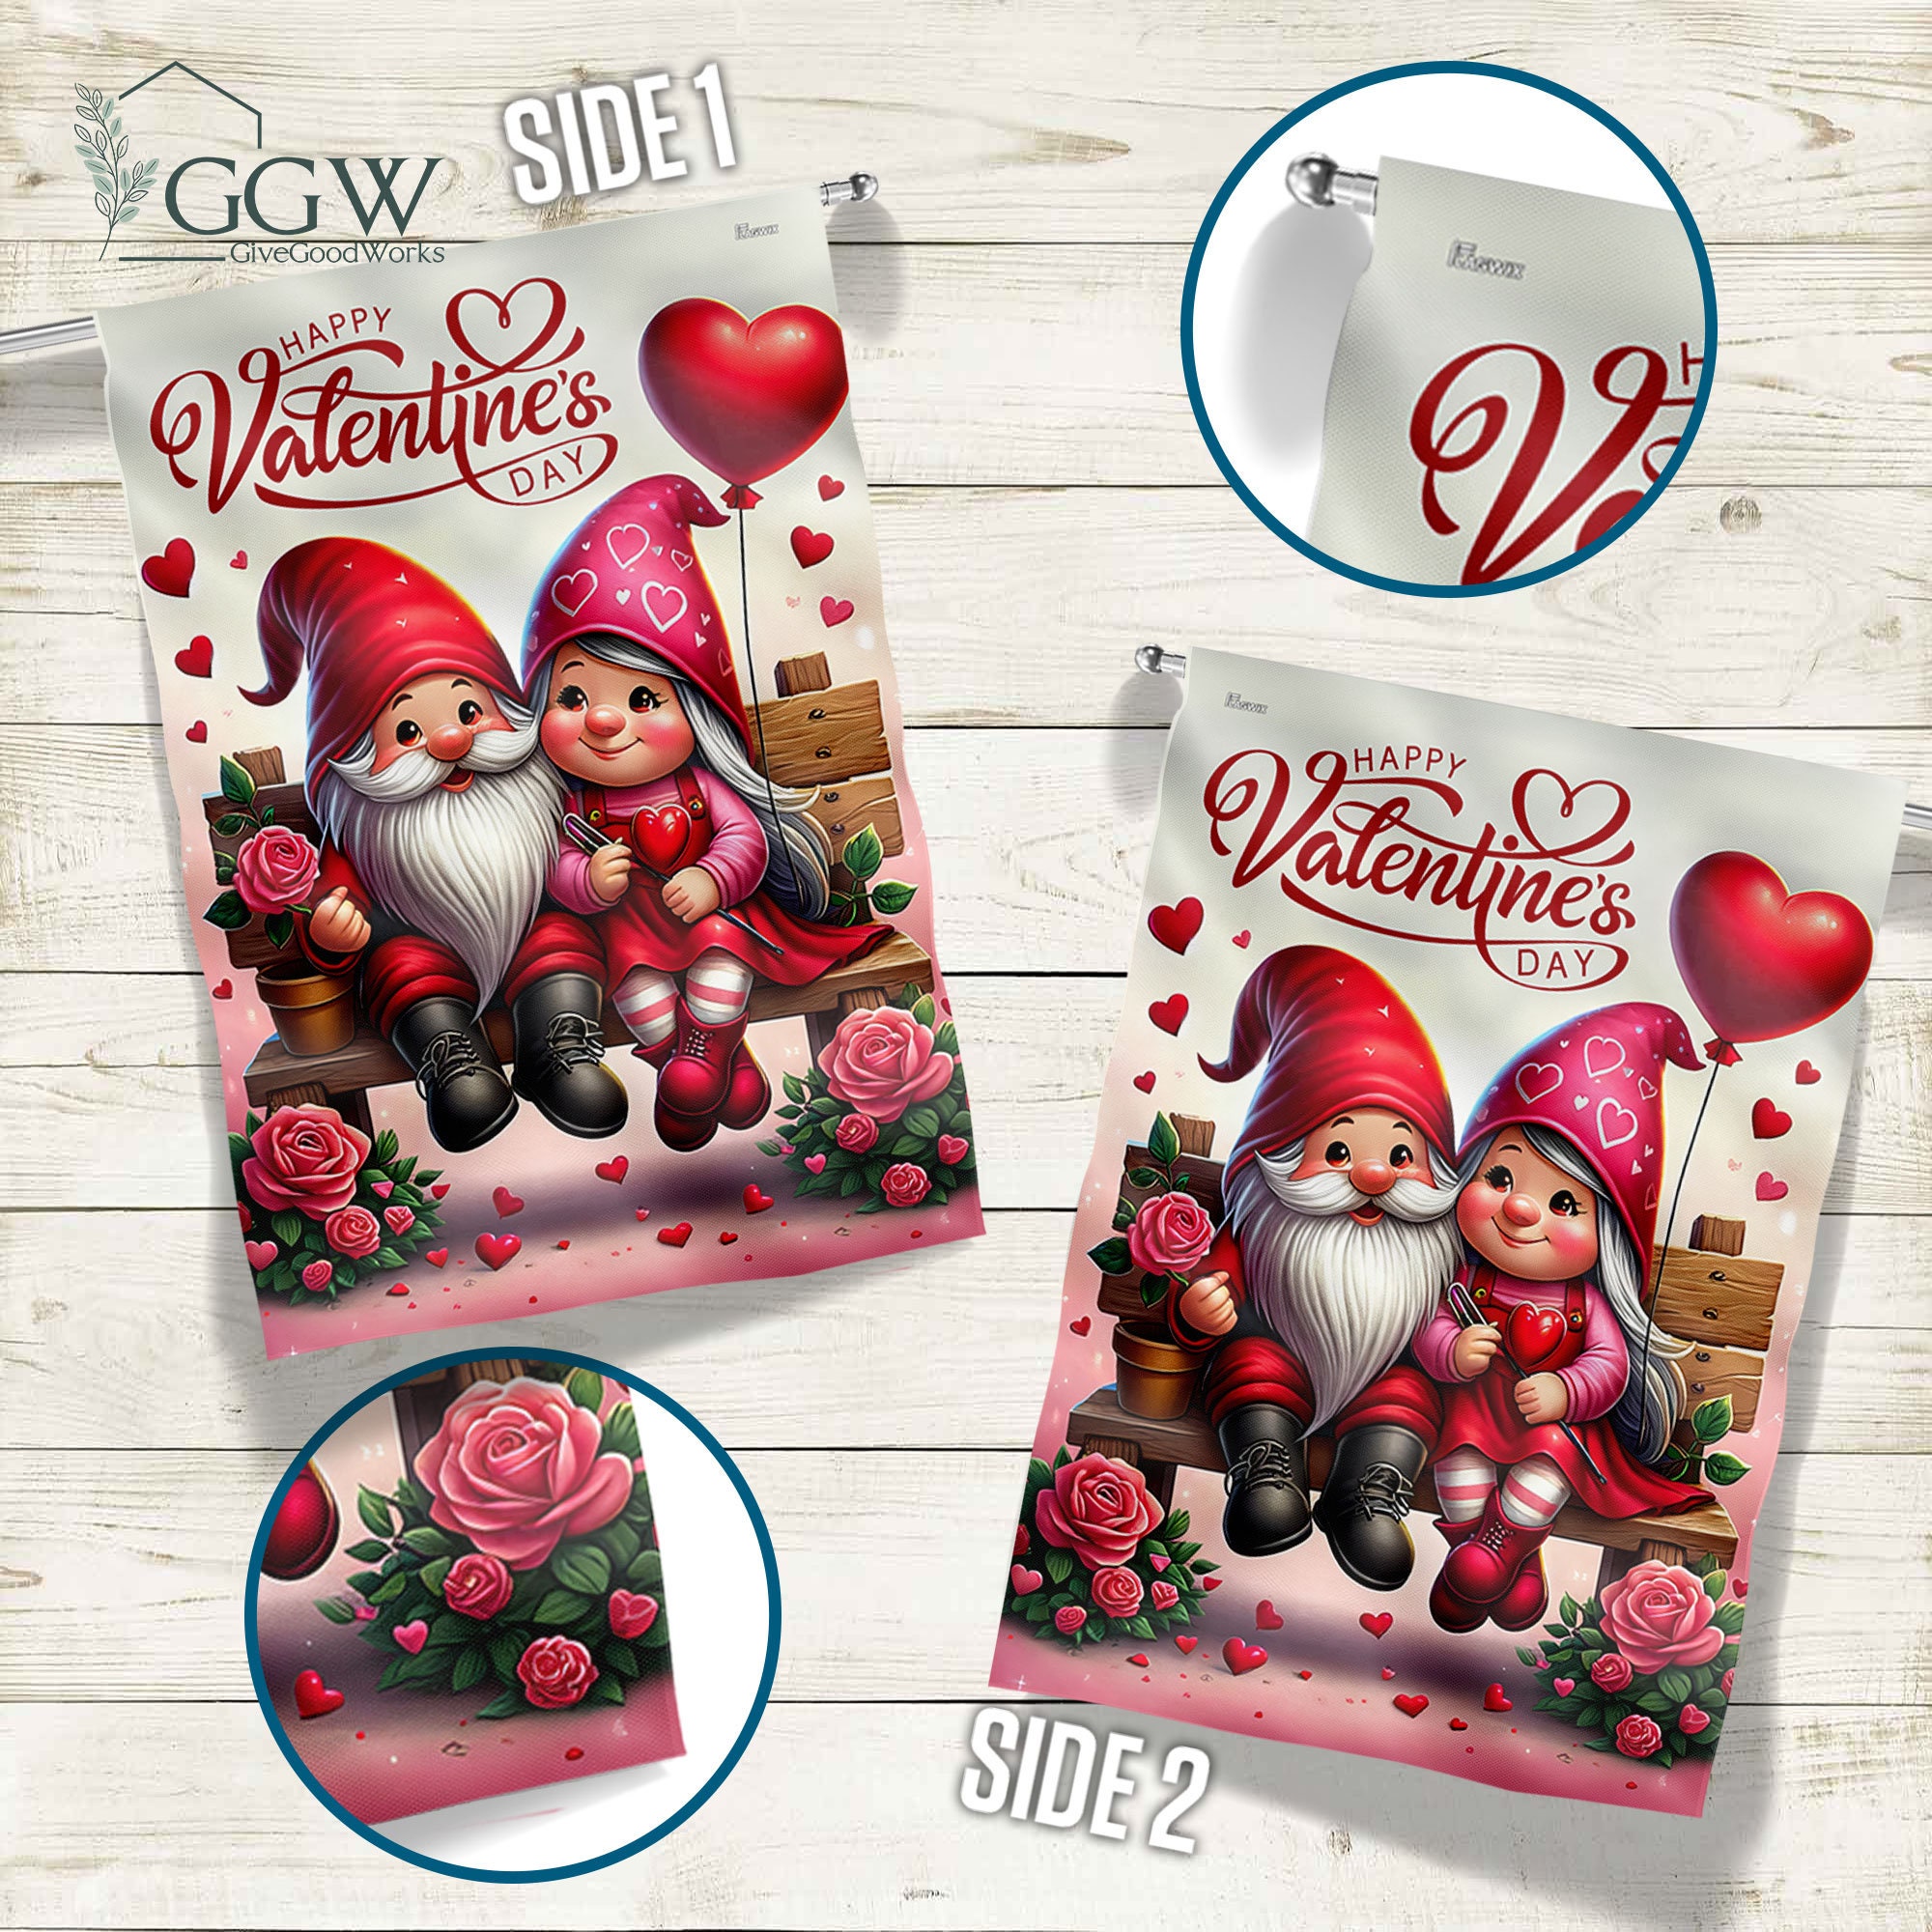 Discover Valentines Gnome Couple Flag, Couple Love Decor, Valentines Day Gift